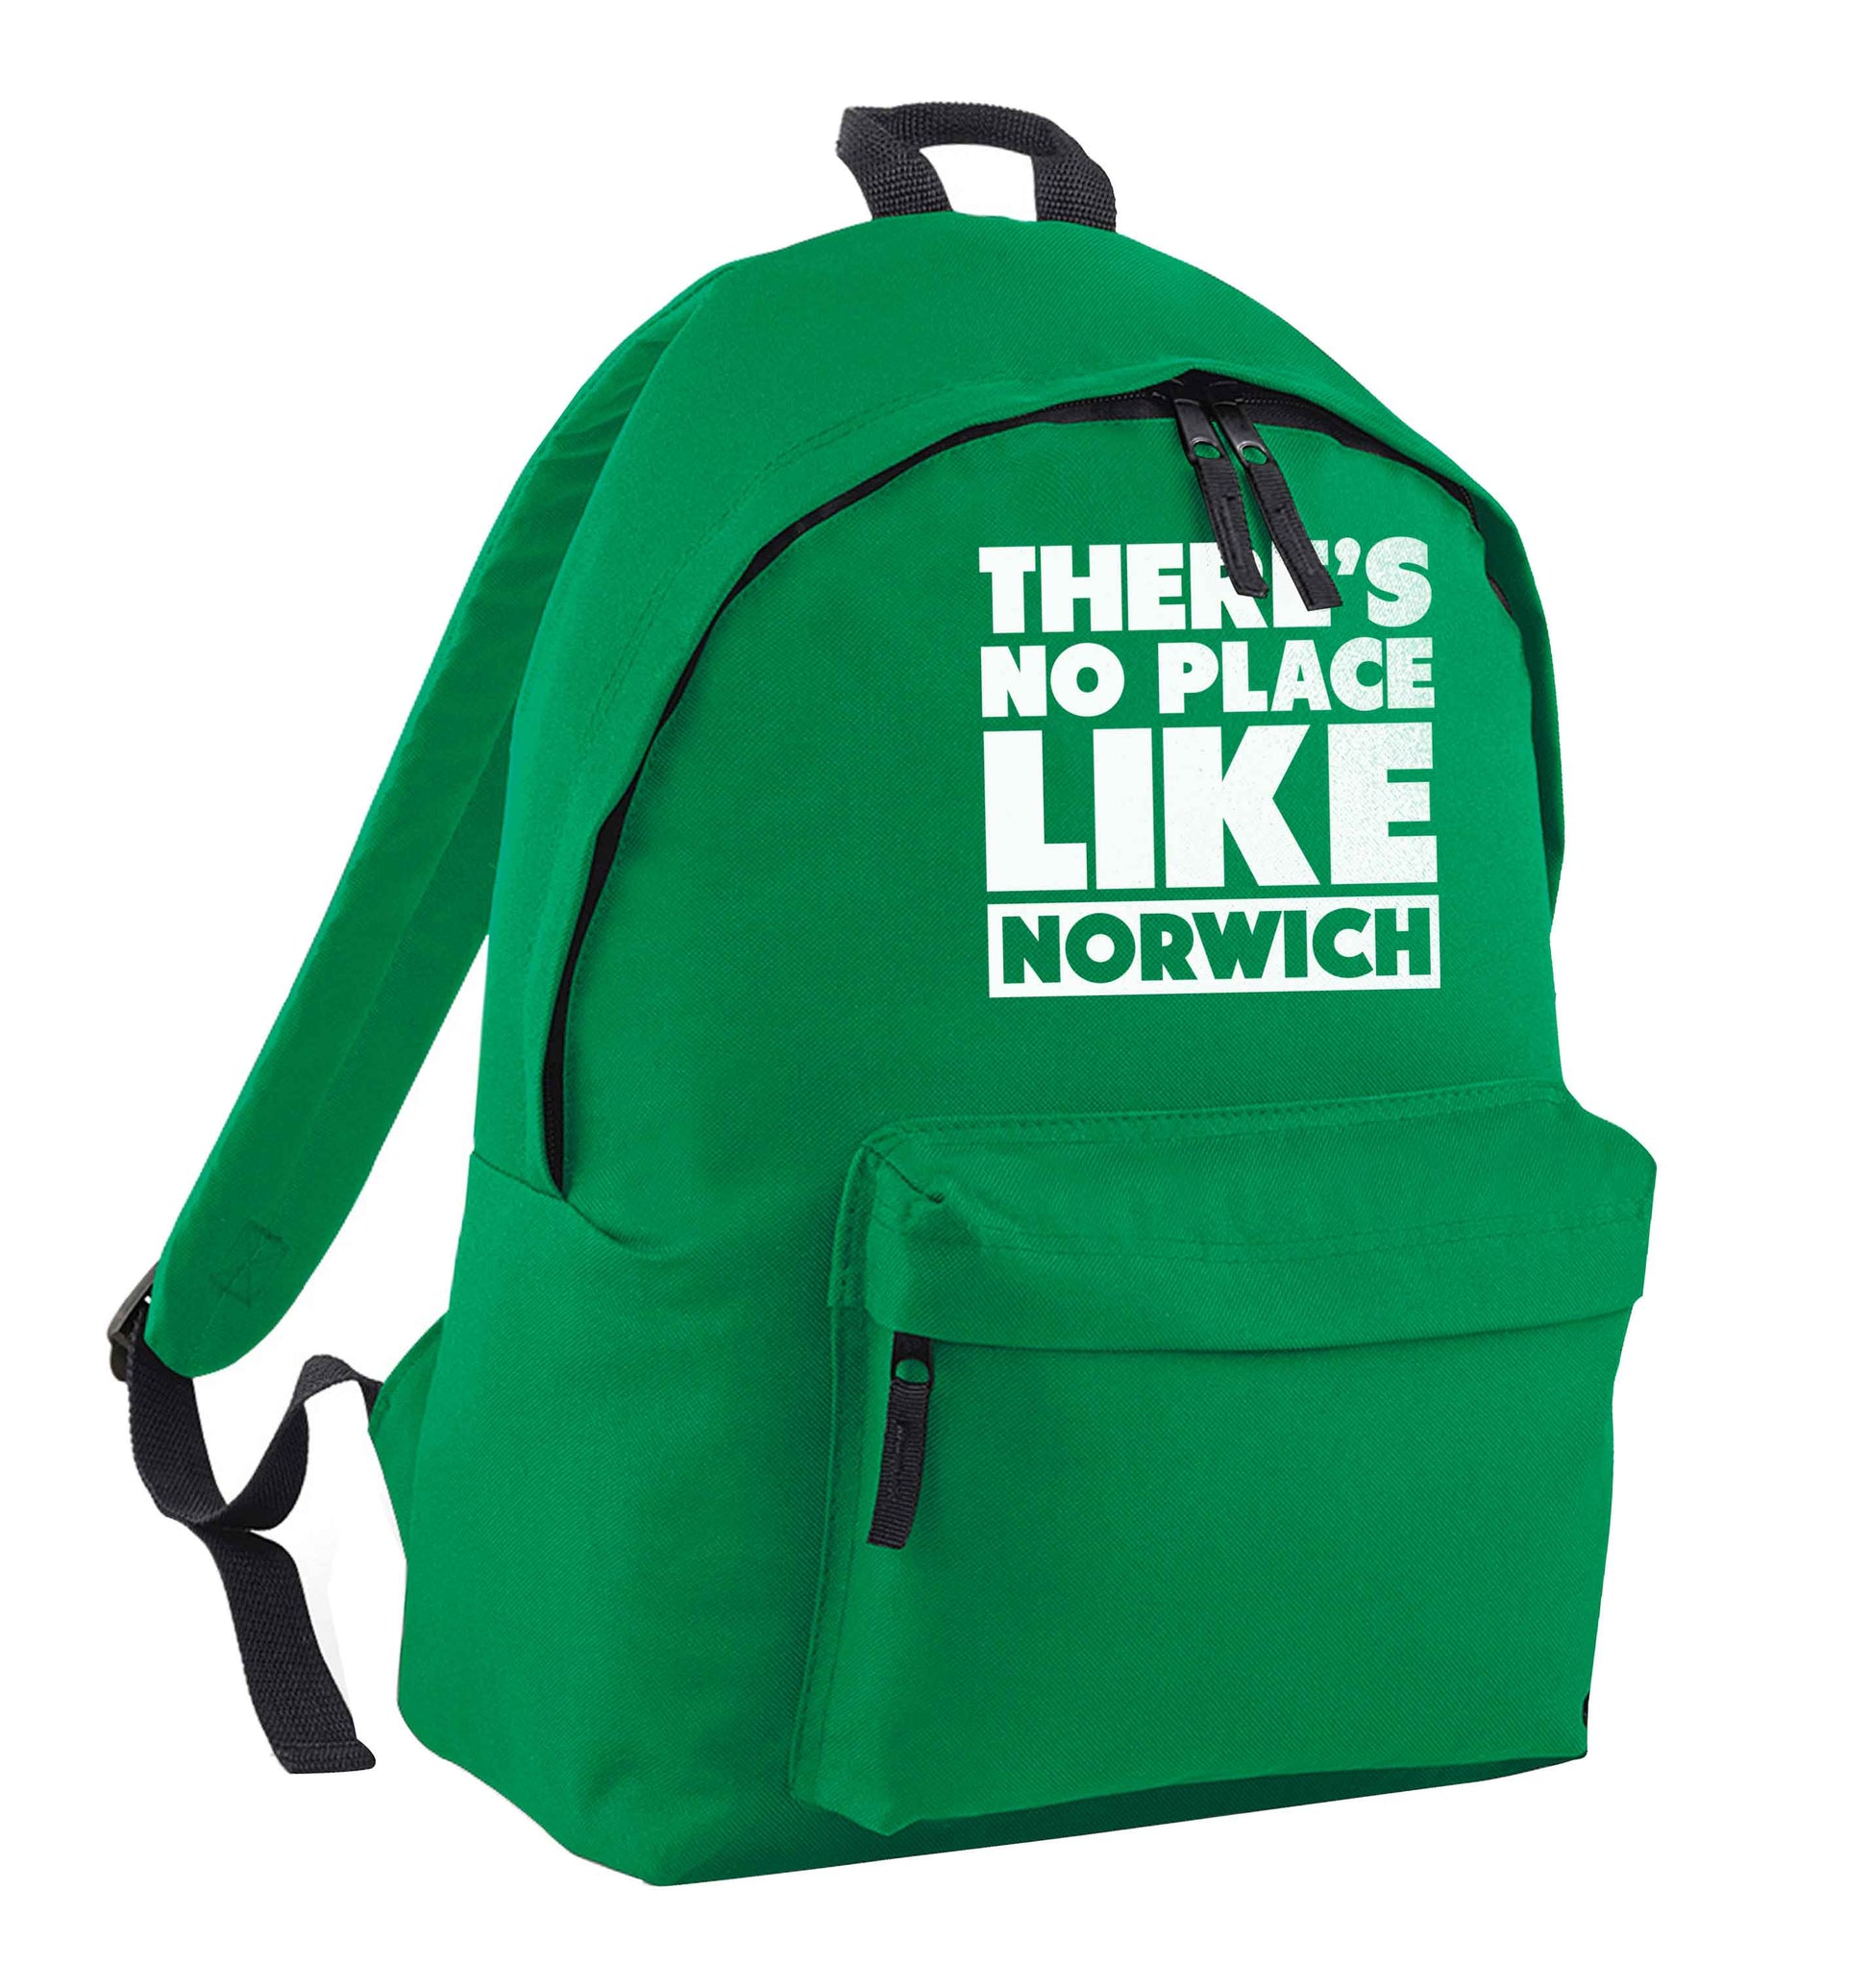 There's no place like Norwich green adults backpack